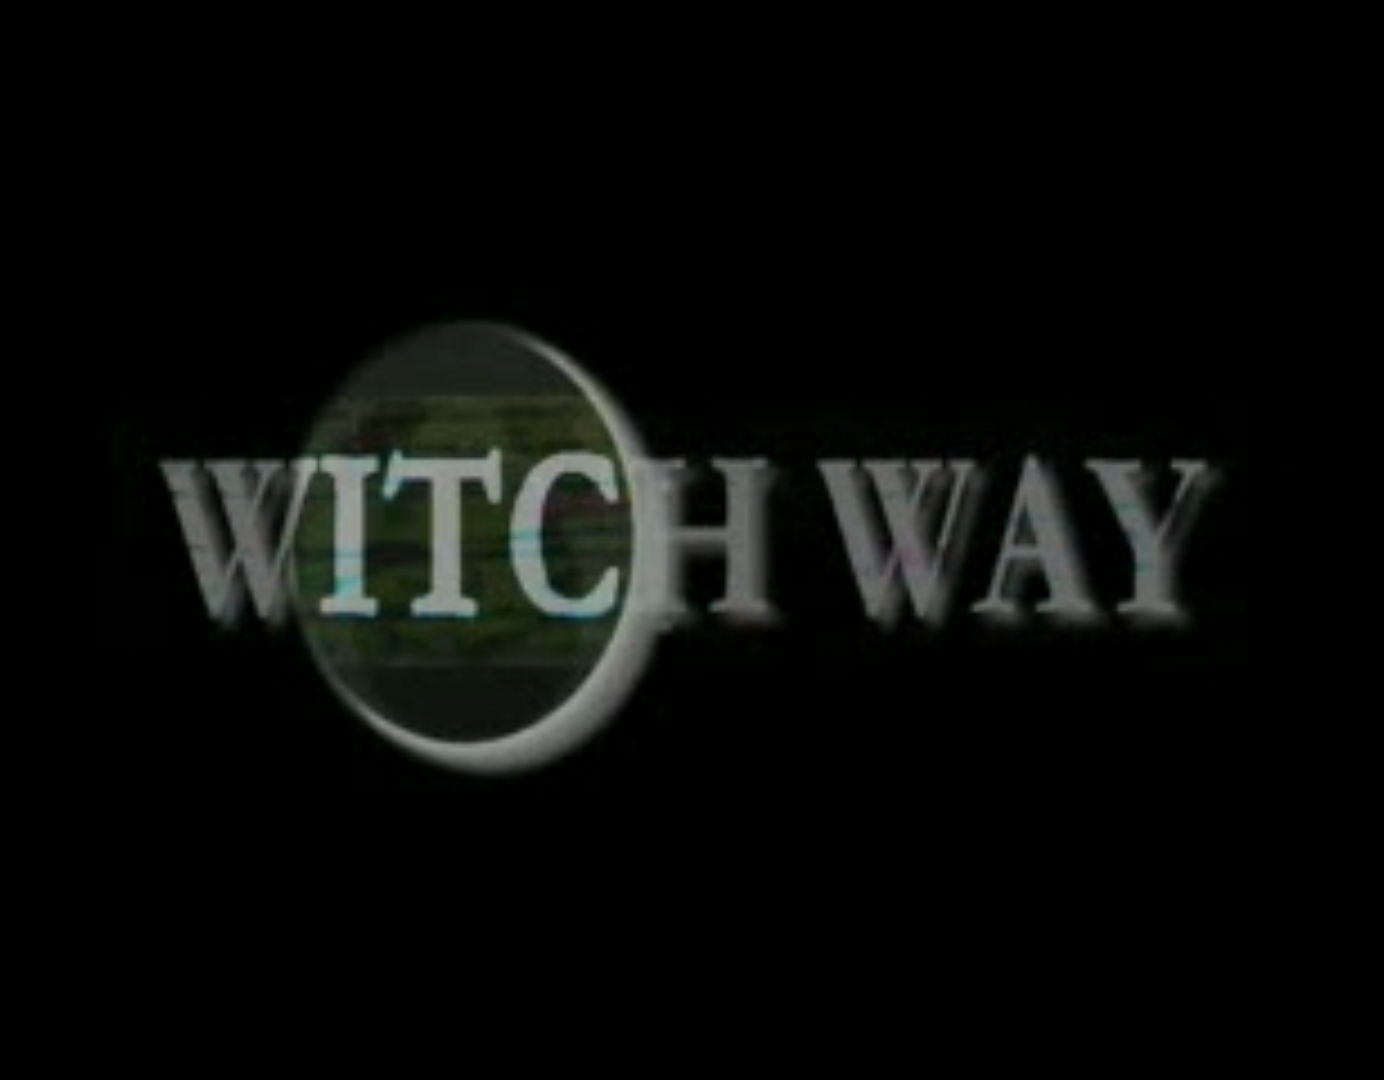 Witch way title 2008 peter camani.png